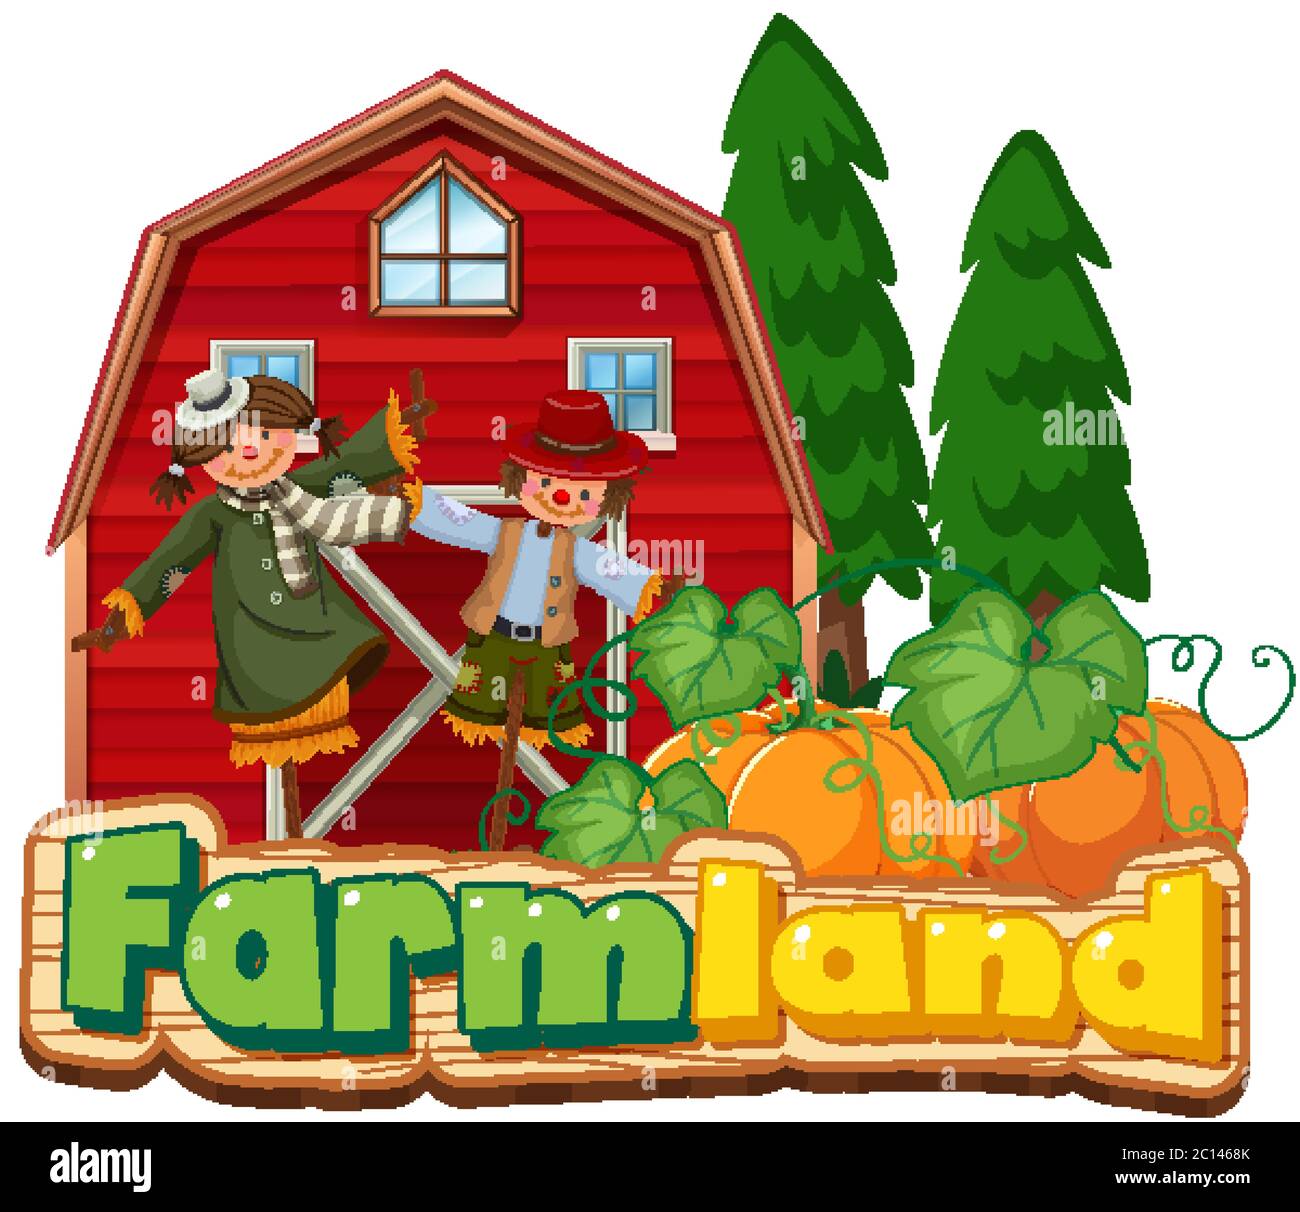 Font design for farmland with scarecrows and red barn illustration Stock Vector